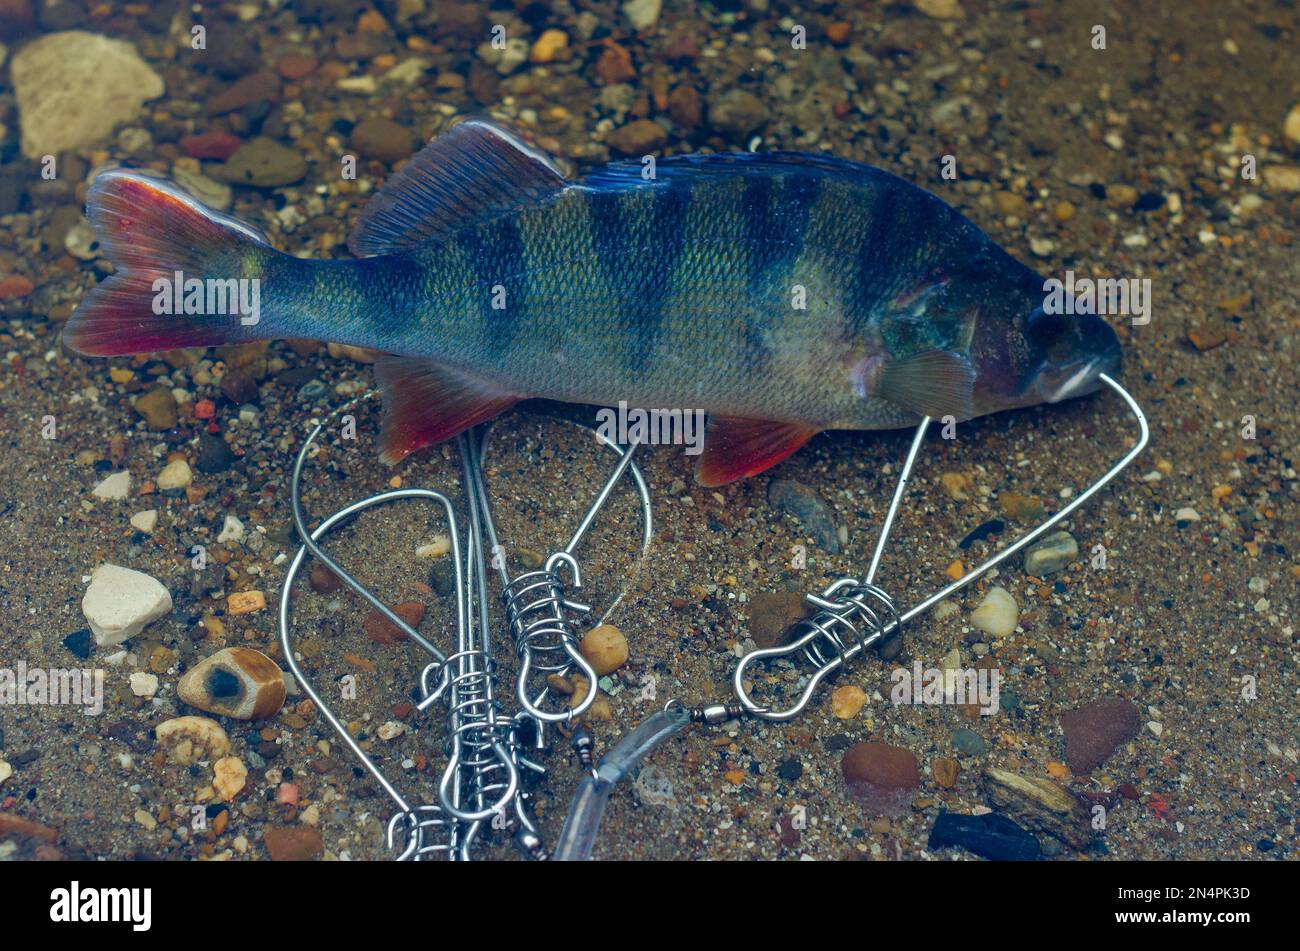 Caught perch in Fish Stringer in clear water floats over the rocks at